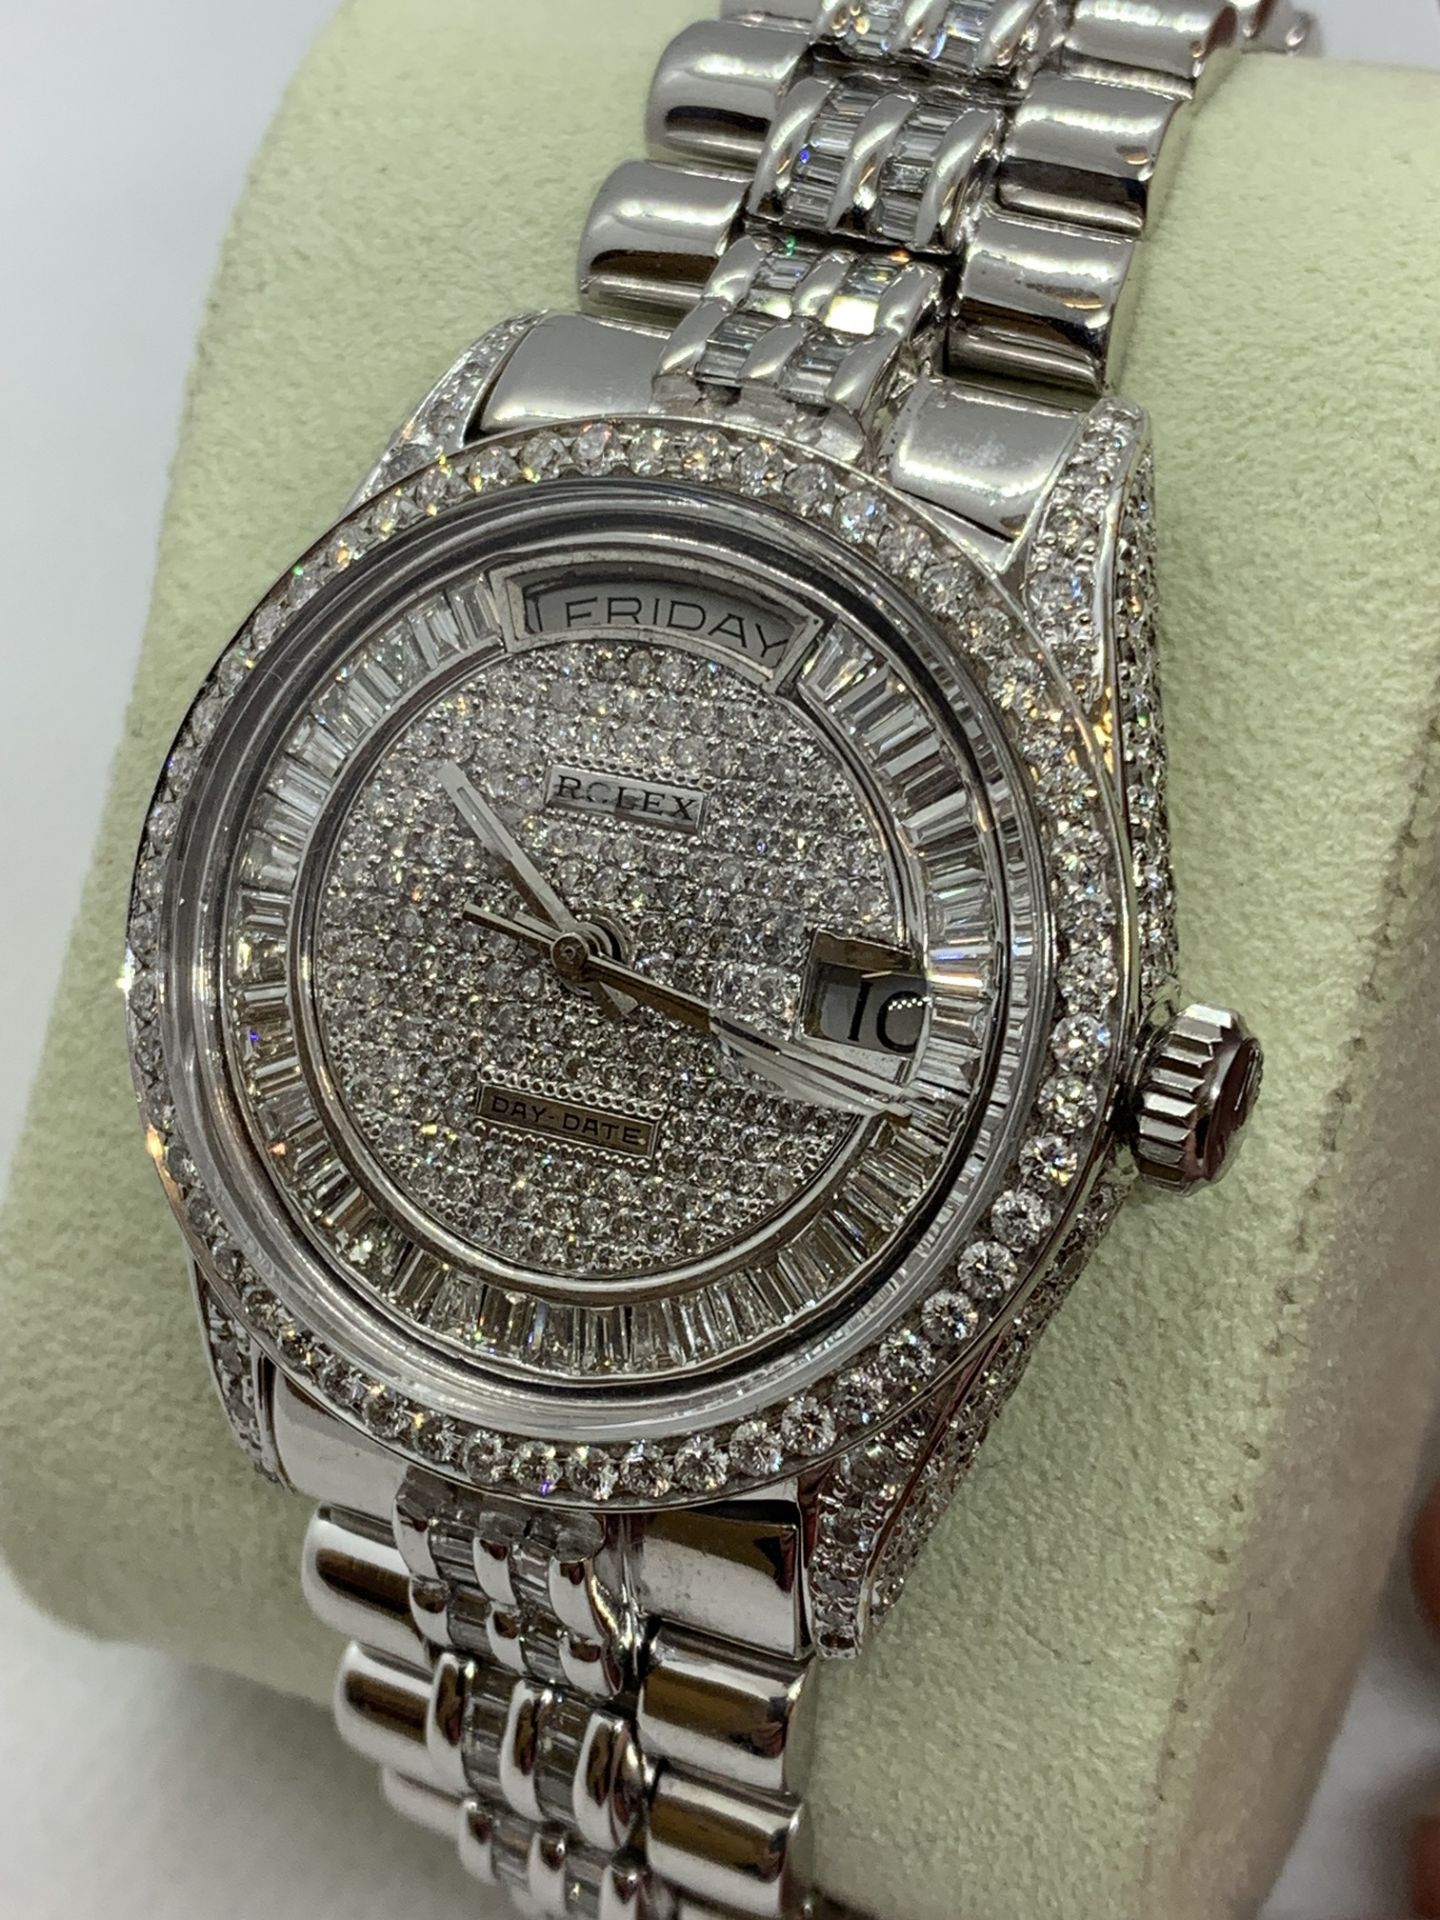 Diamond Encrusted Mens 36mm Day-Date, Solid White Gold - Diamond/ “Super President” Marked ROLEX - Image 11 of 18